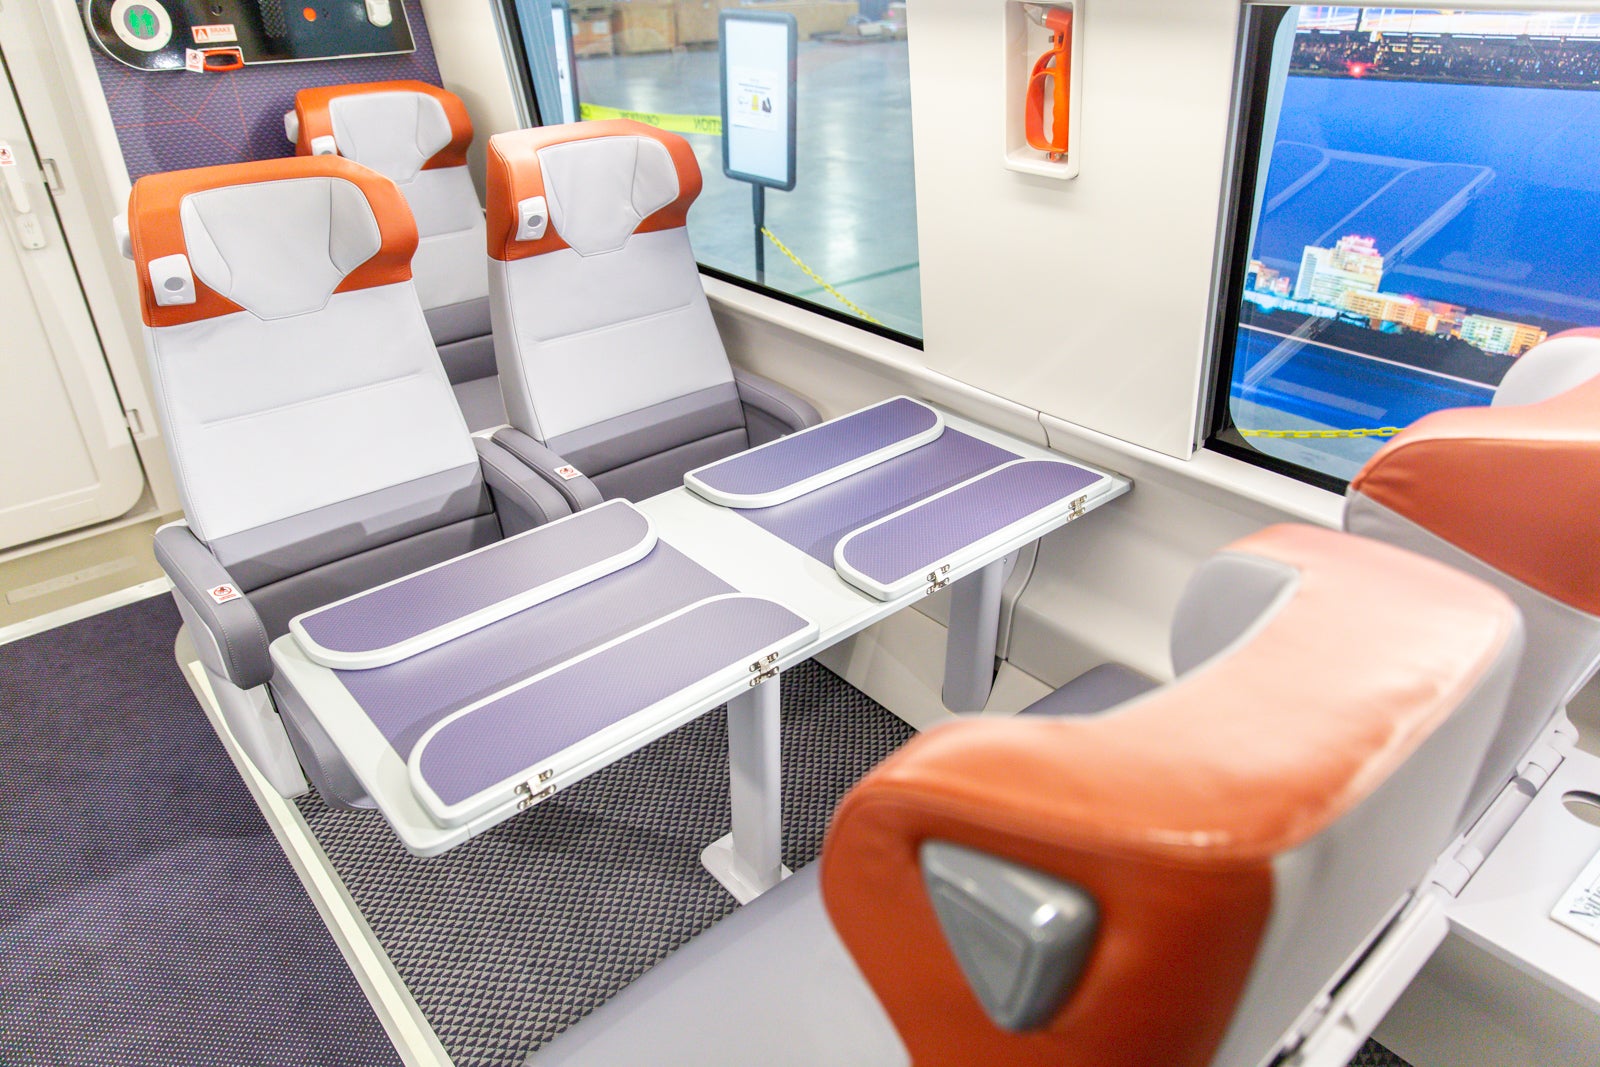 The Brand New Amtrak Acela Fleet Is Coming Heres A Look Inside The New Trains Flipboard